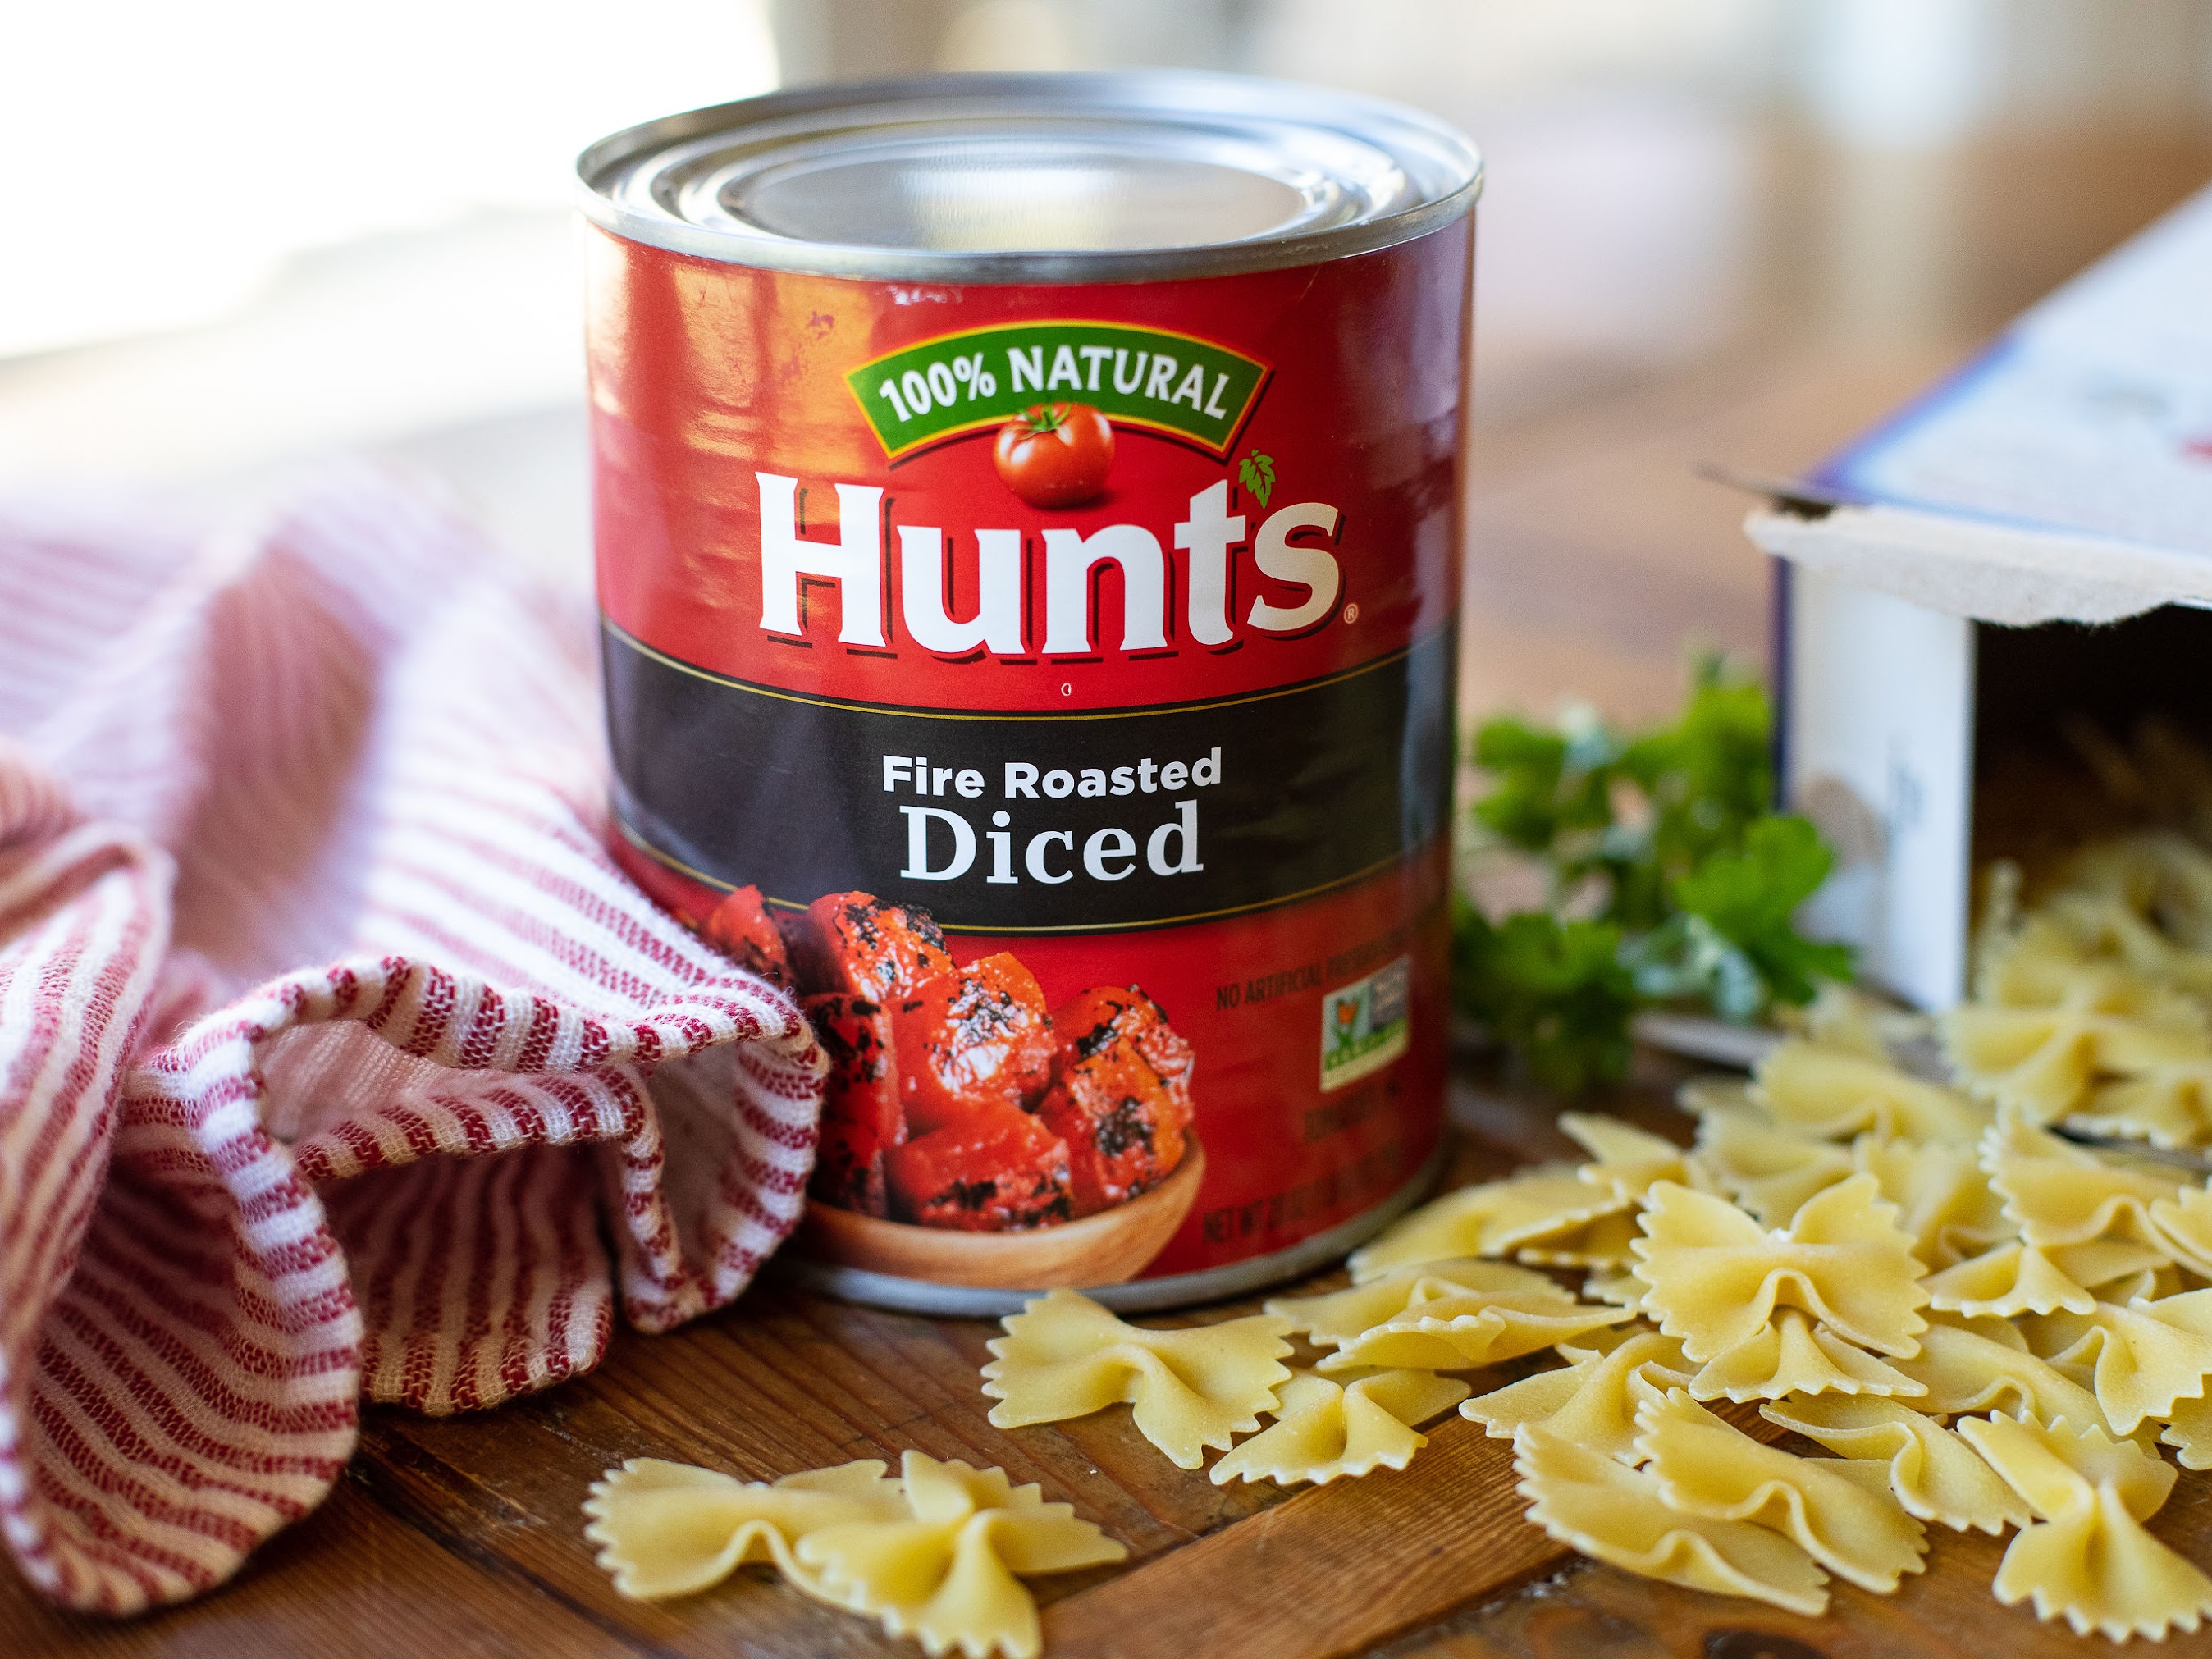 Get A Big Can Of Hunt’s Tomatoes For As Low As 30¢ At Publix